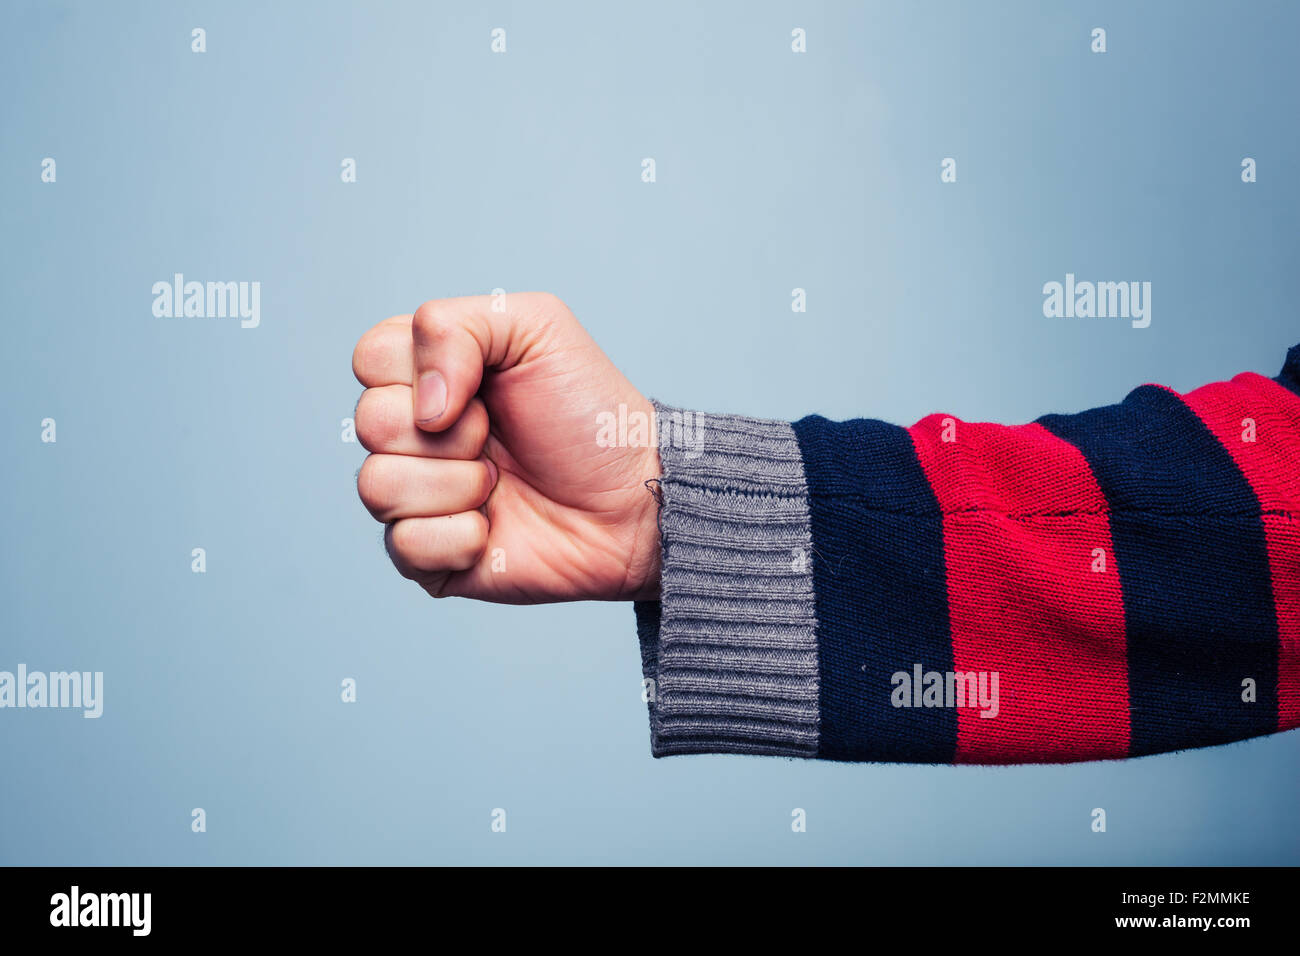 Young man clenching his fist Stock Photo